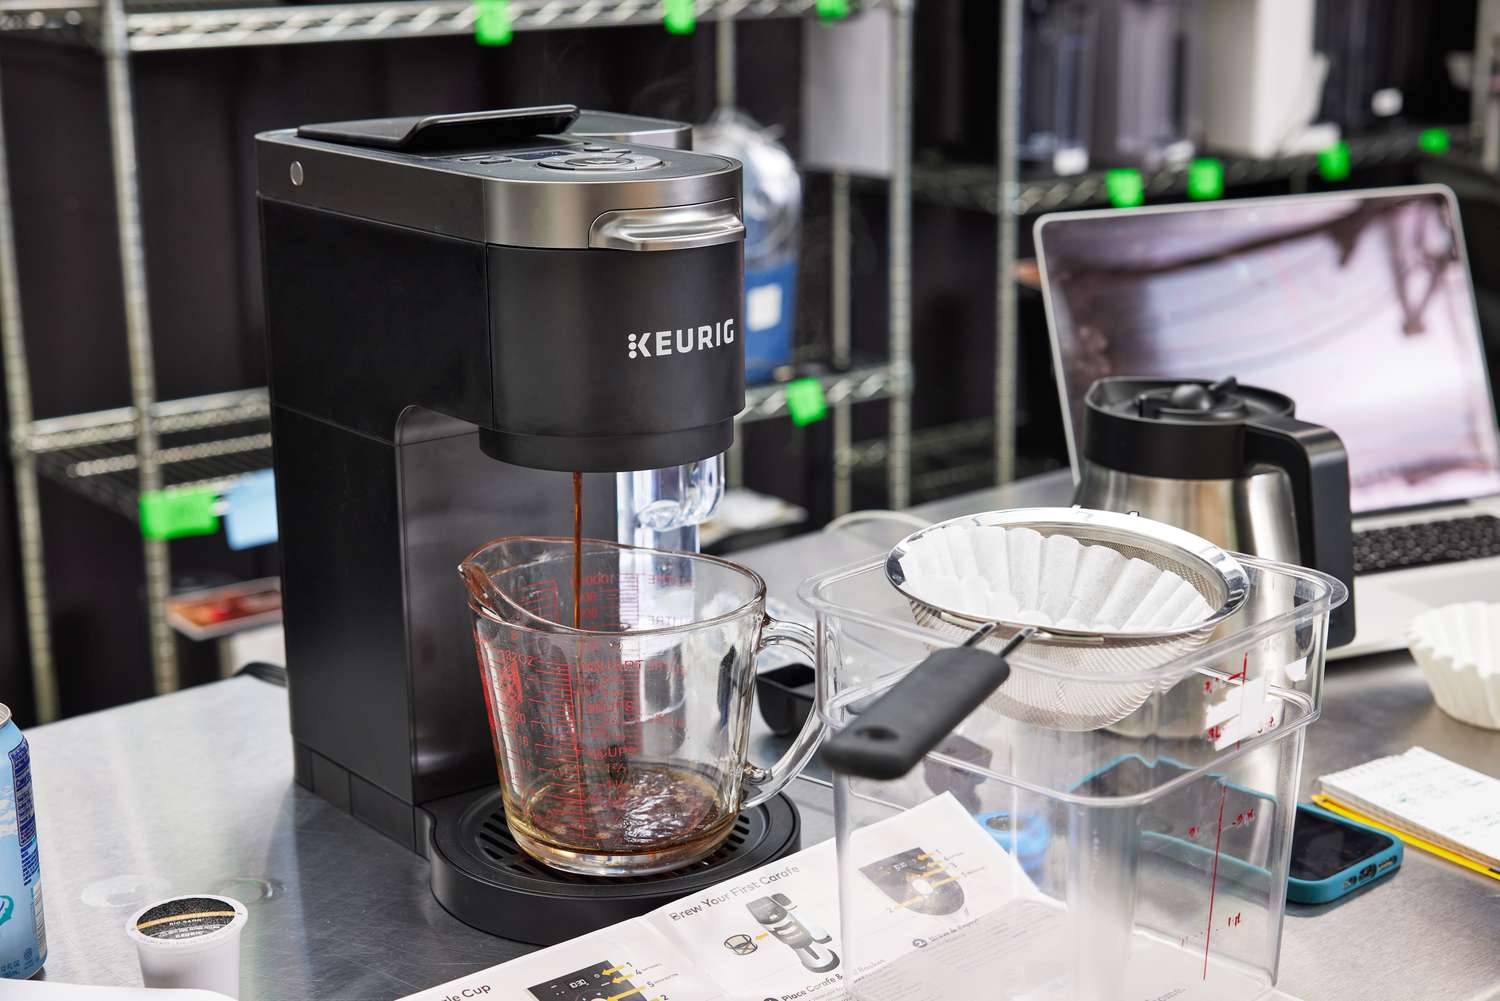 Keurig K-Duo Coffee Maker pouring coffee into a measuring cup